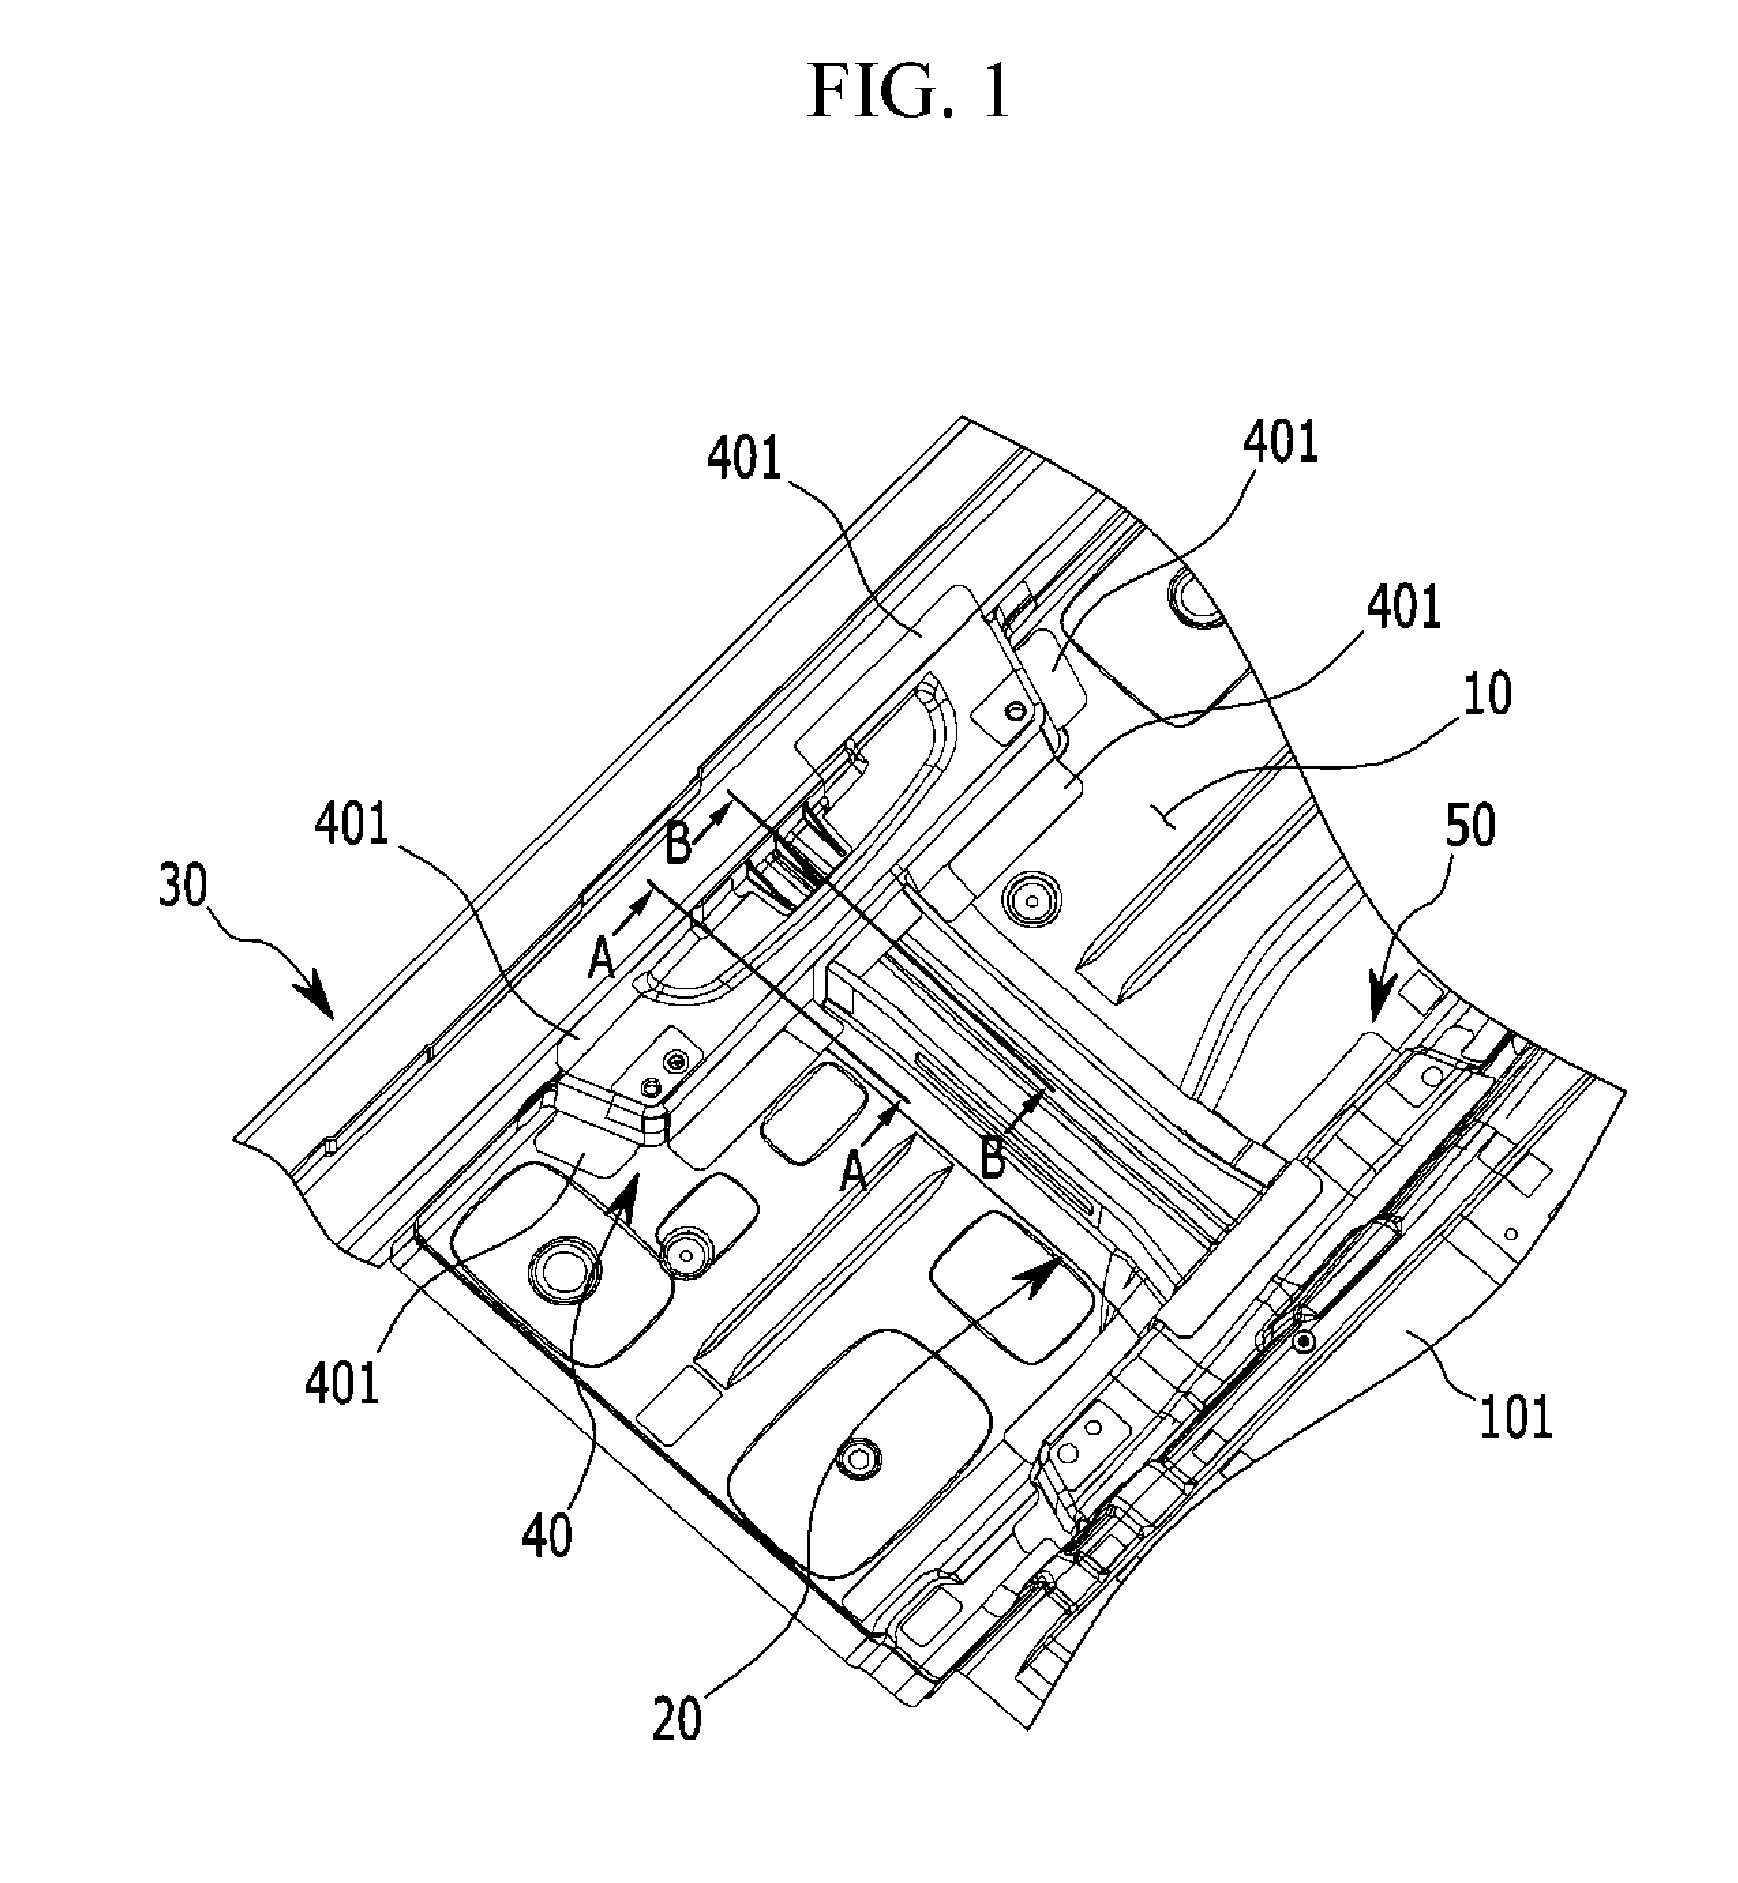 Structure for reinforcing seat mounting portion of vehicle body